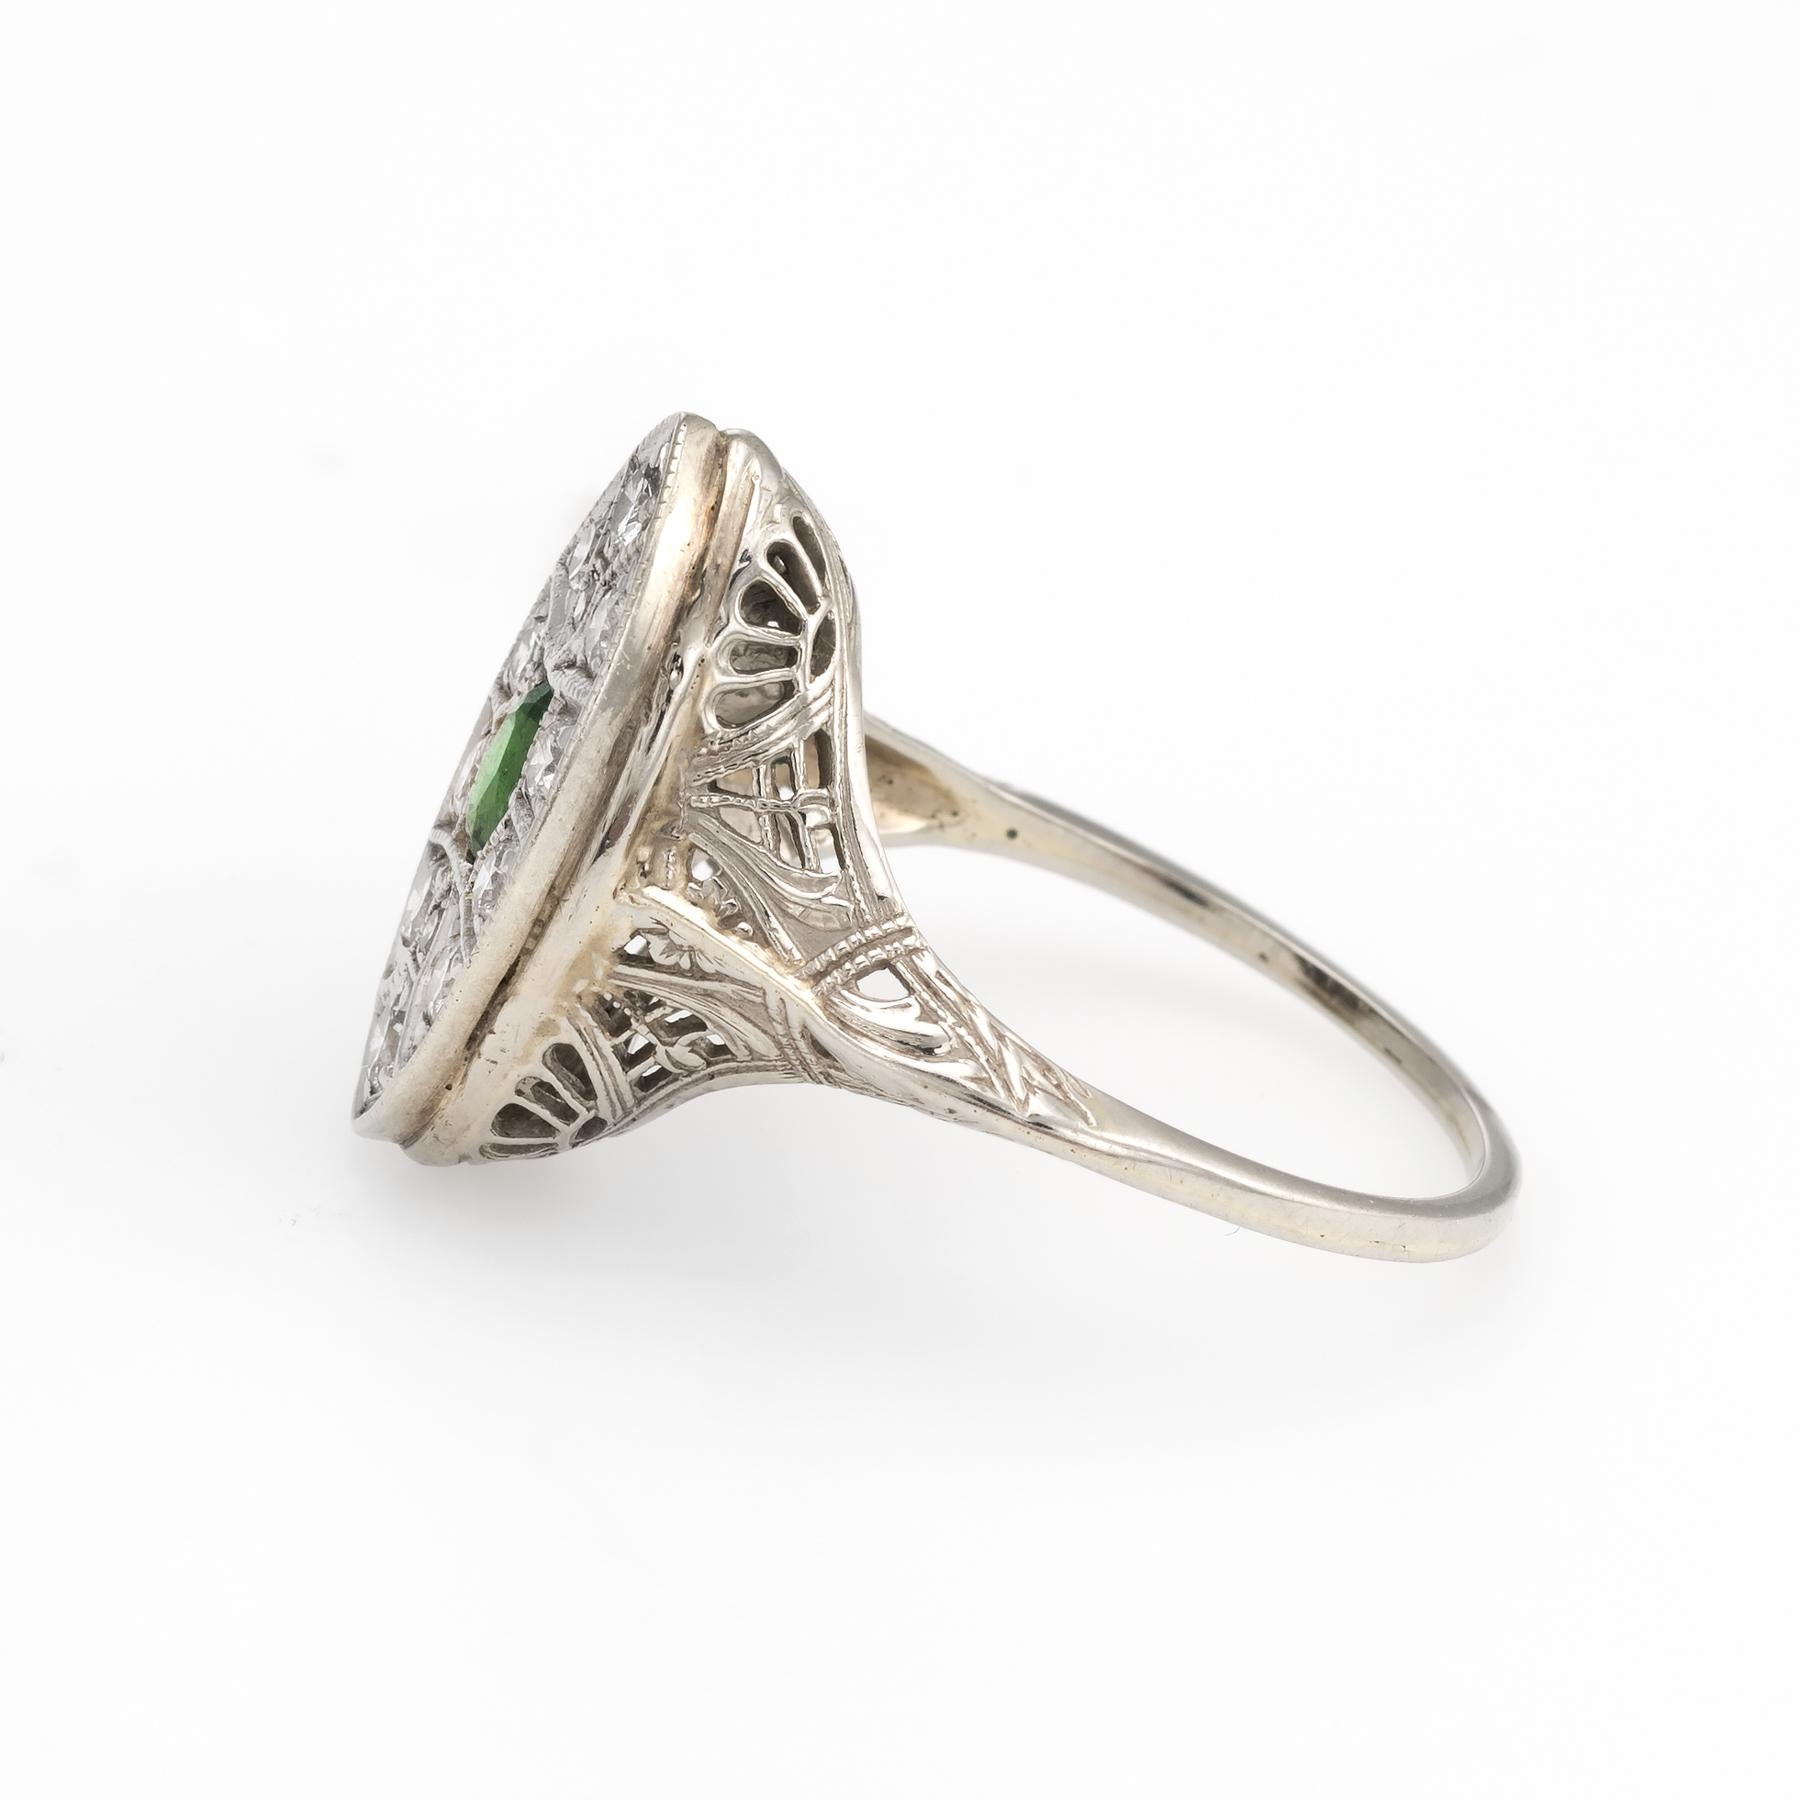 Vintage Art Deco Diamond Ring Navette Emerald 14k White Gold Filigree In Excellent Condition For Sale In Torrance, CA